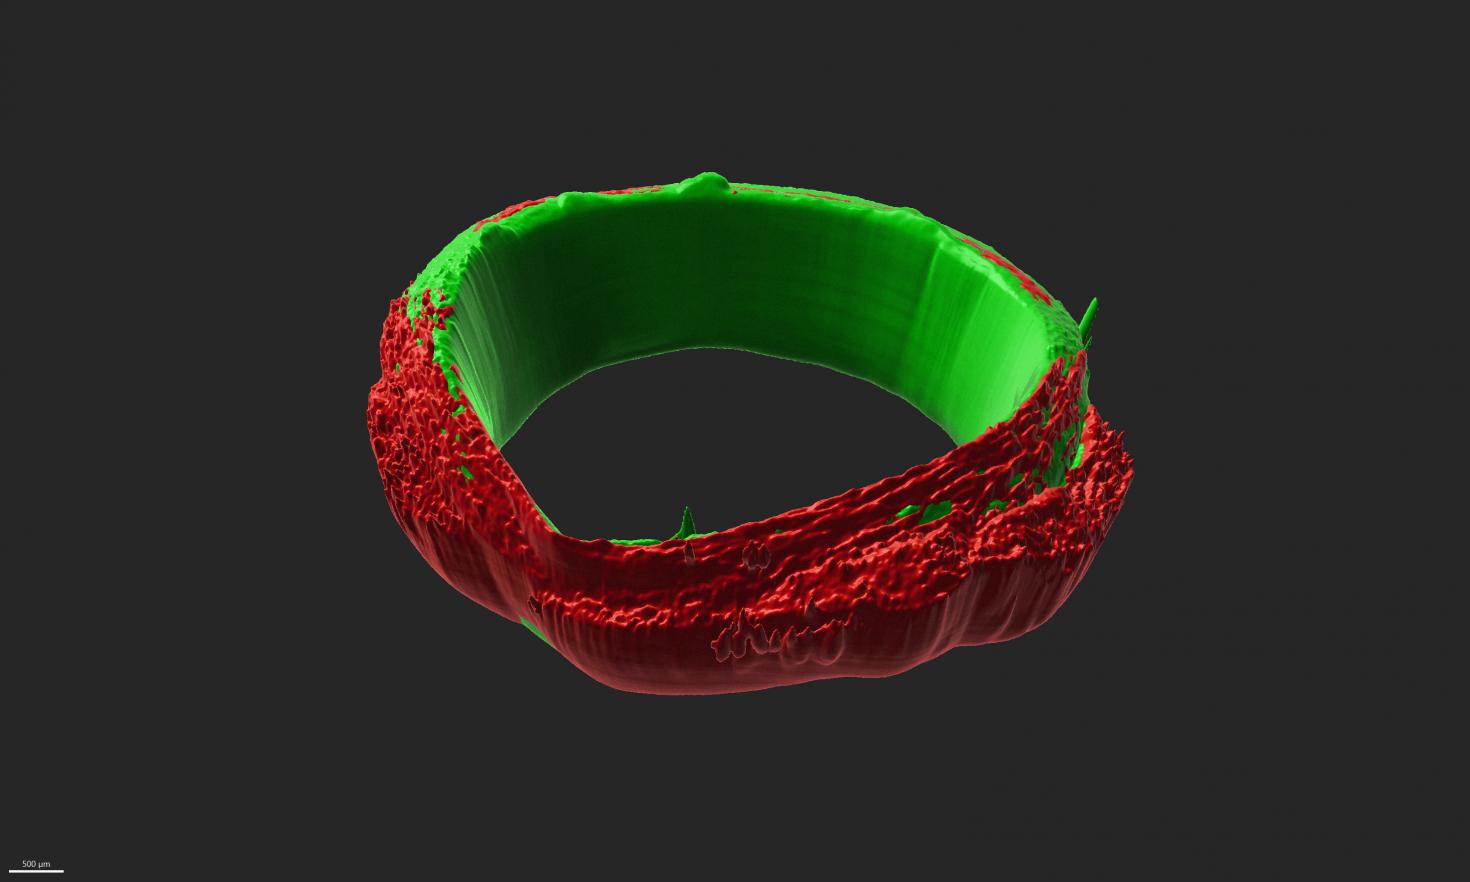 skeletal muscle ring-shaped tissues